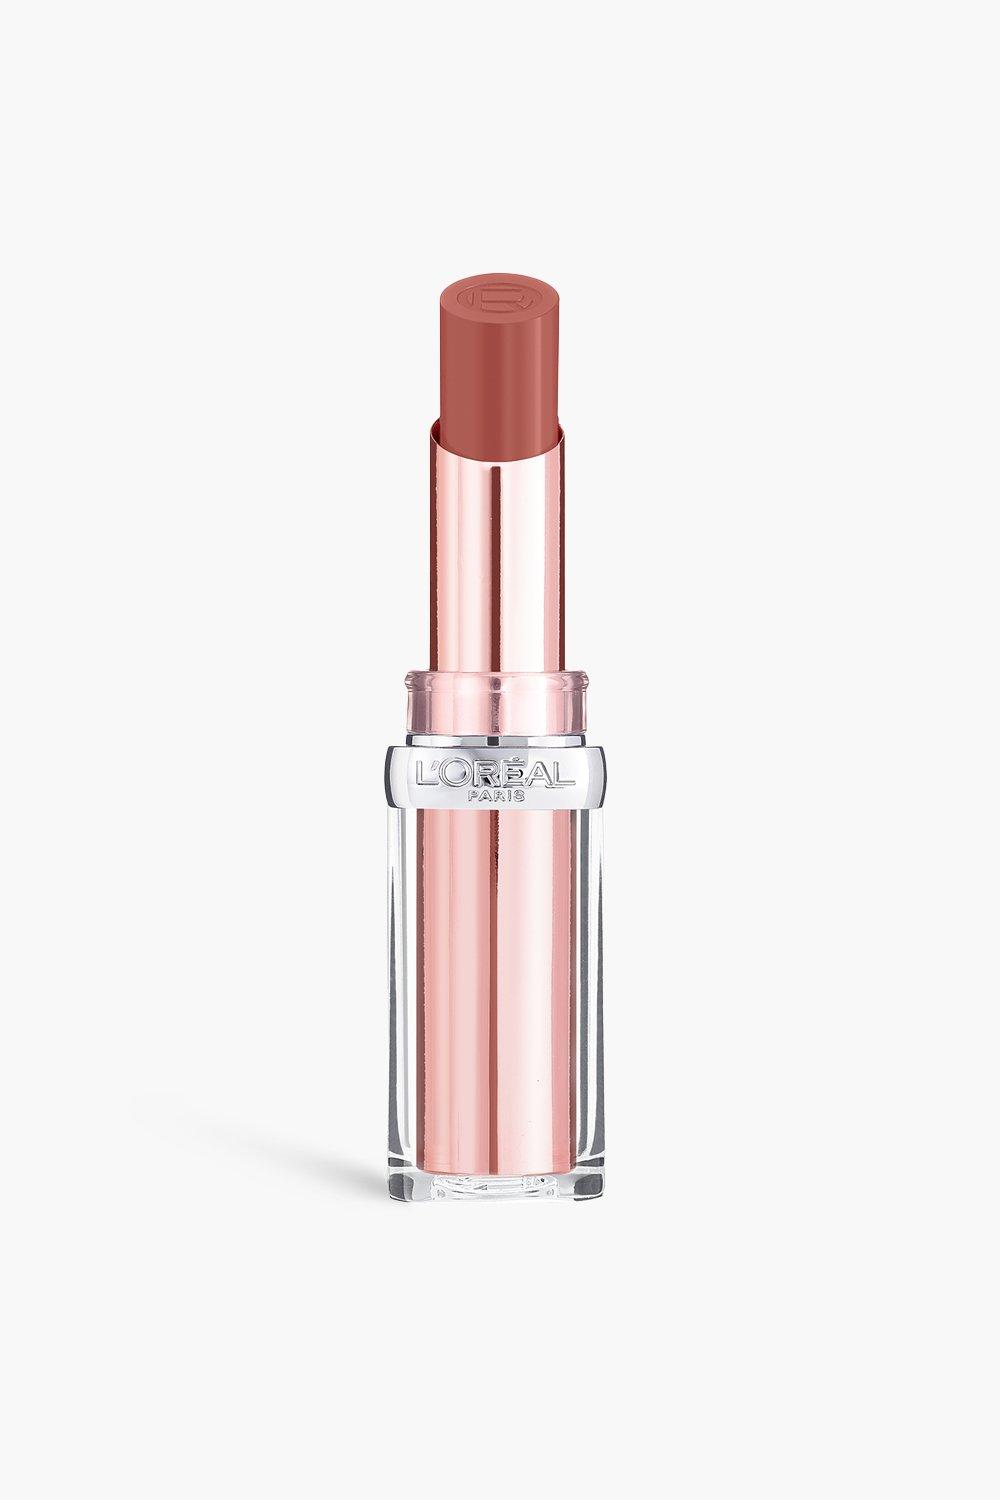 L'Oreal Paris Glow Paradise Natural-Looking Balm-In-Lipstick, Nude